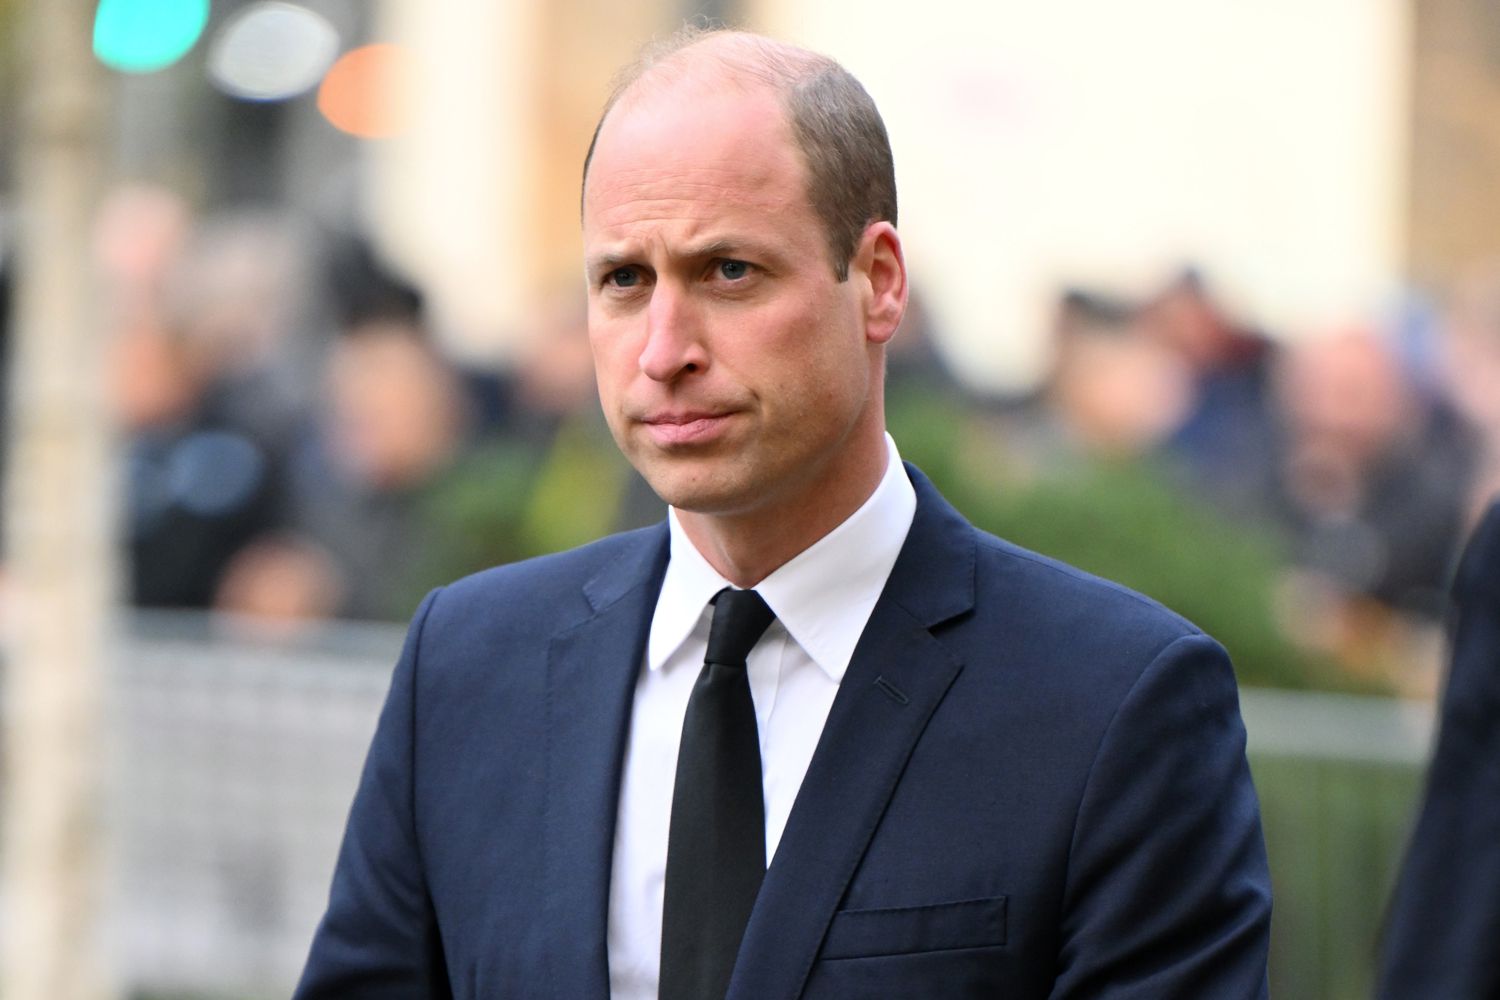 Prince William Makes Quiet Solo Outing amid Kate’s Cancer Treatment [Video]